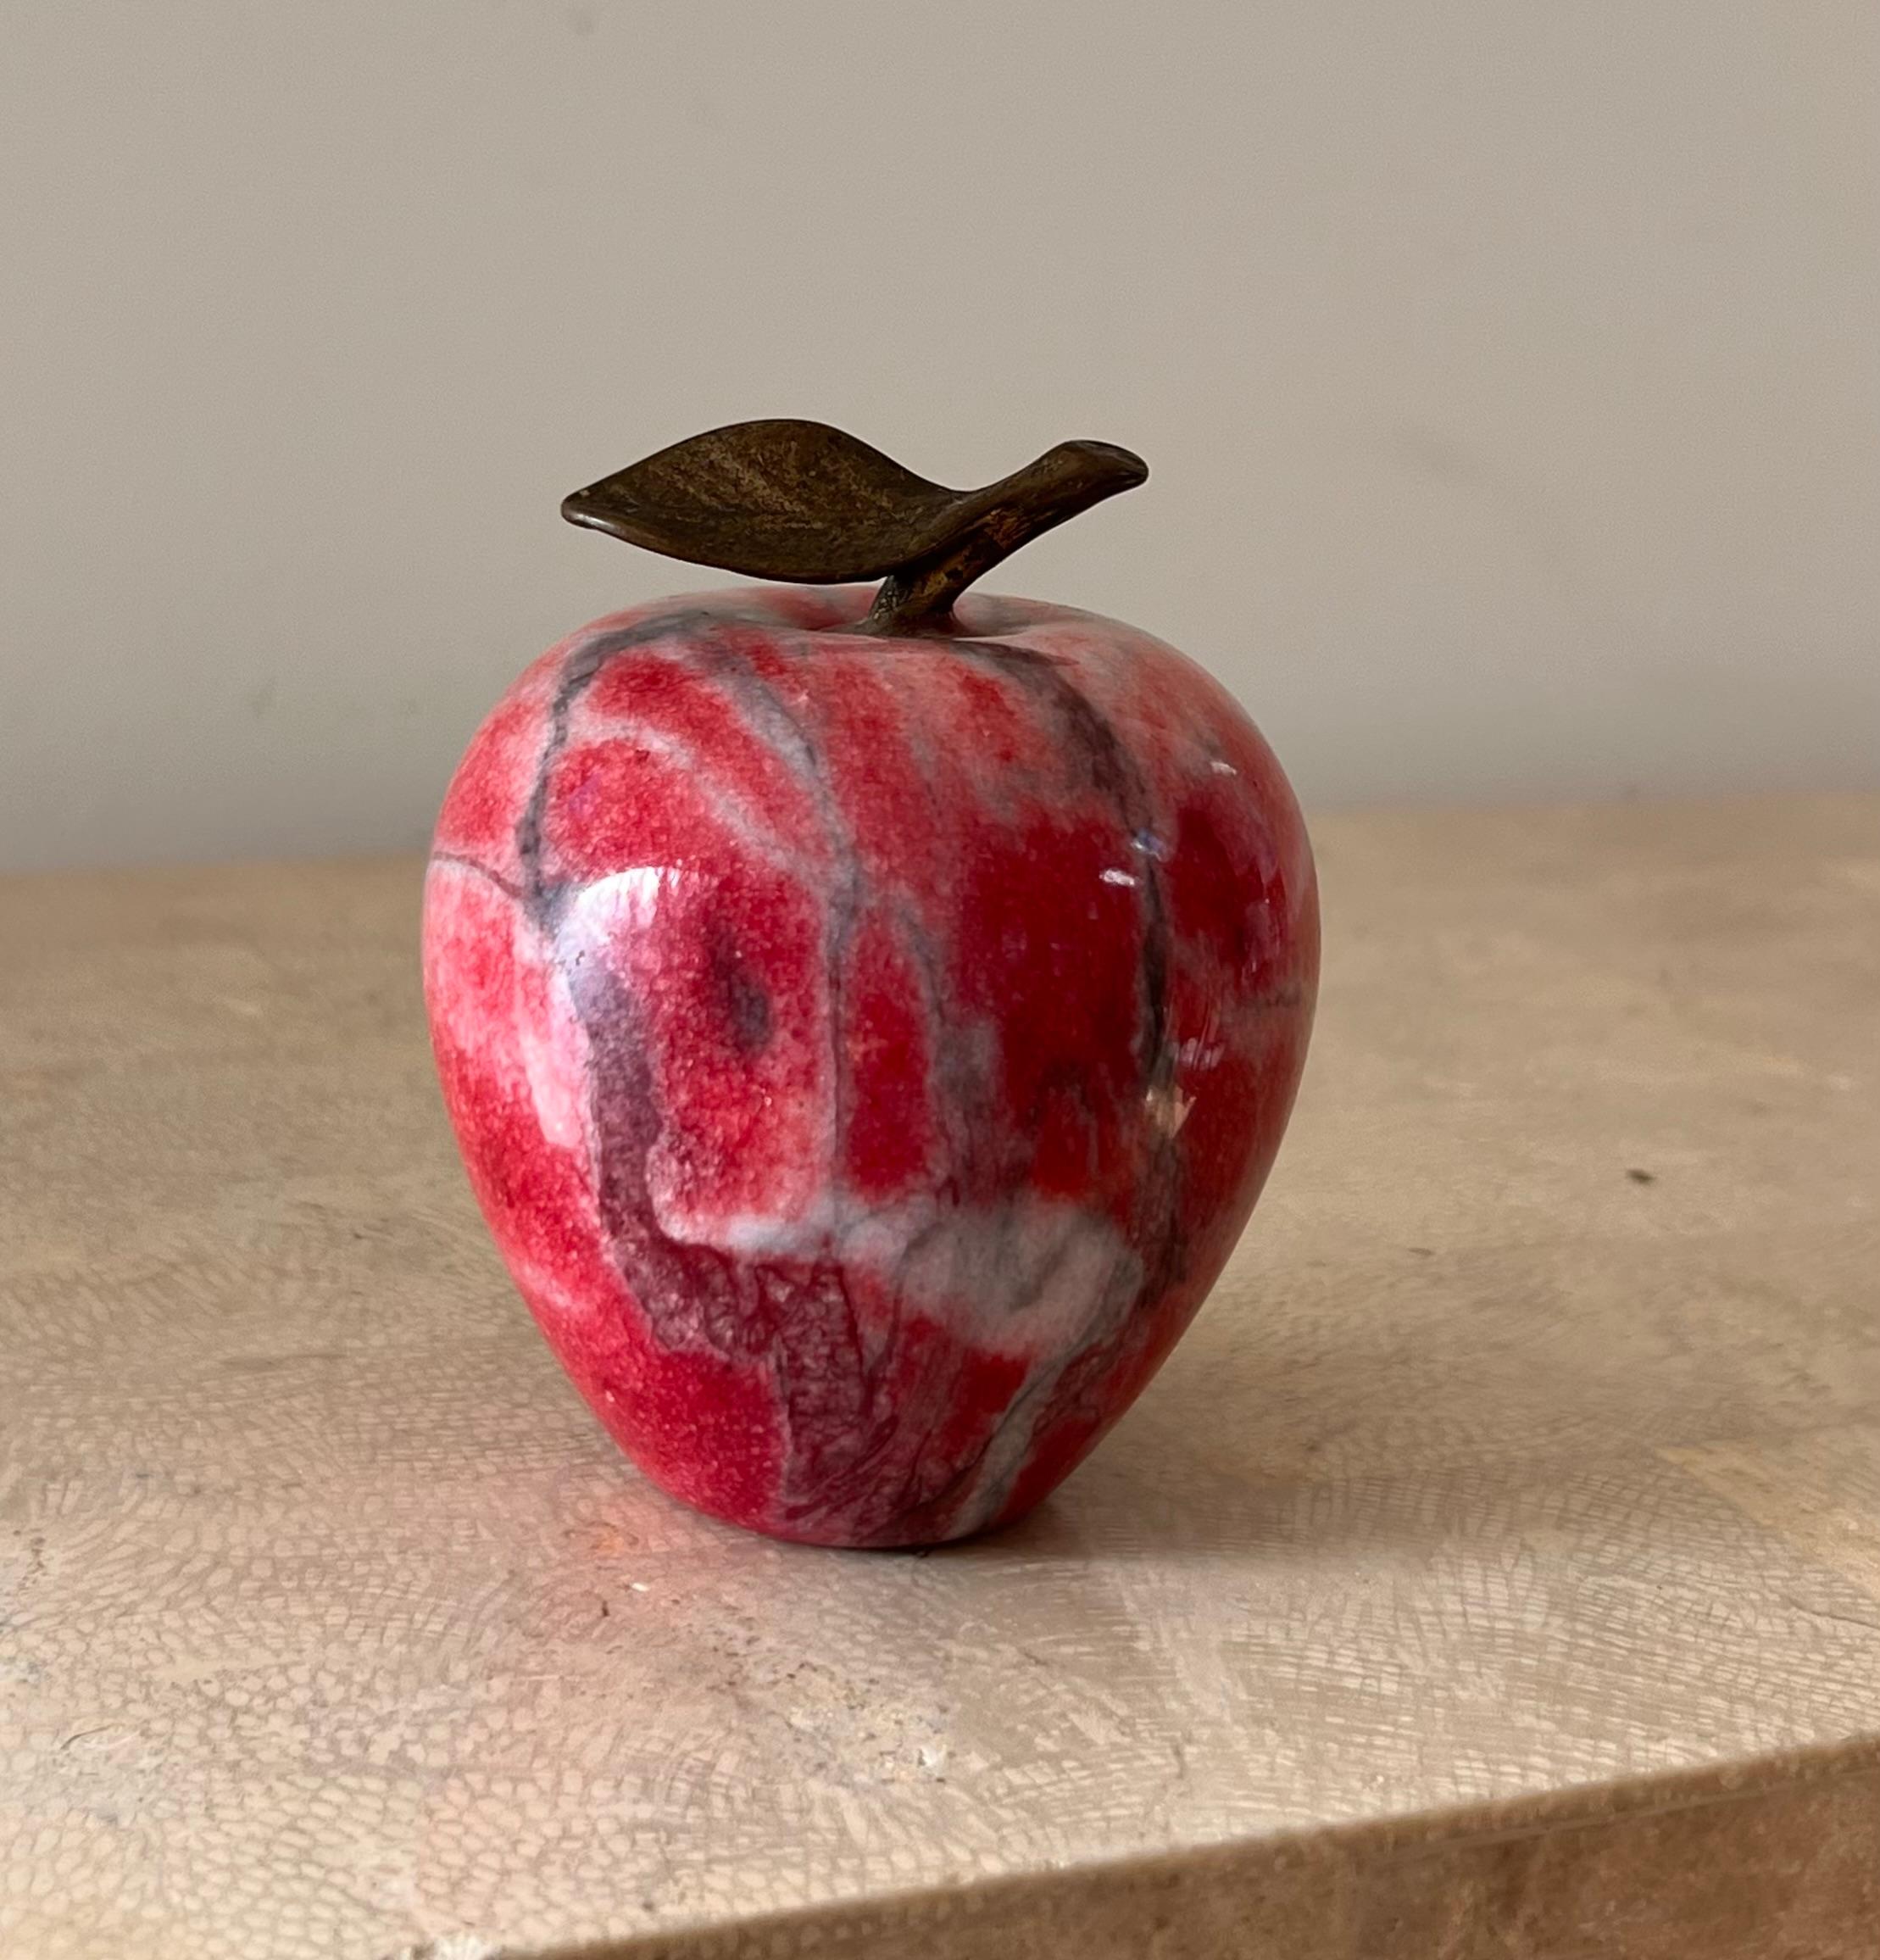 20th Century Vintage Italian Marble Apple Paperweight with Bronze Stem, 1960s